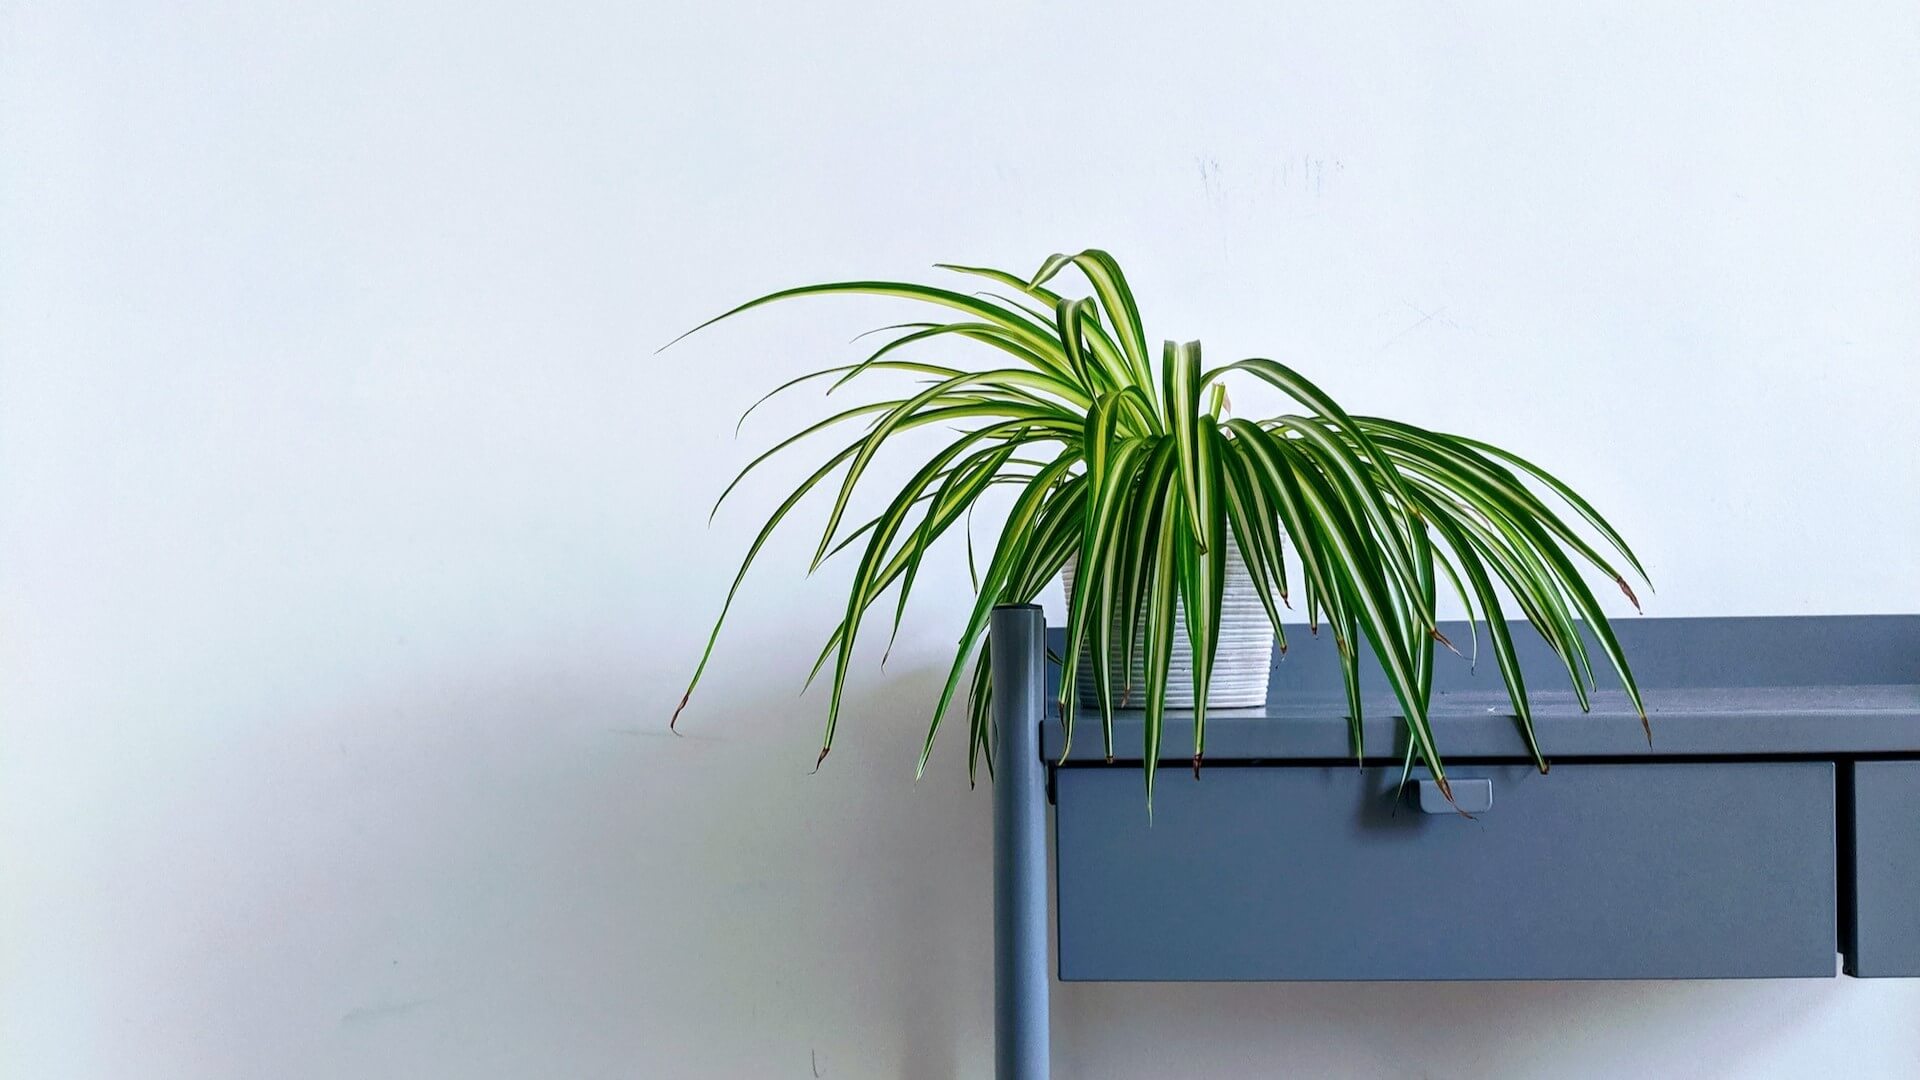 Spider plant with long, arching foliage.